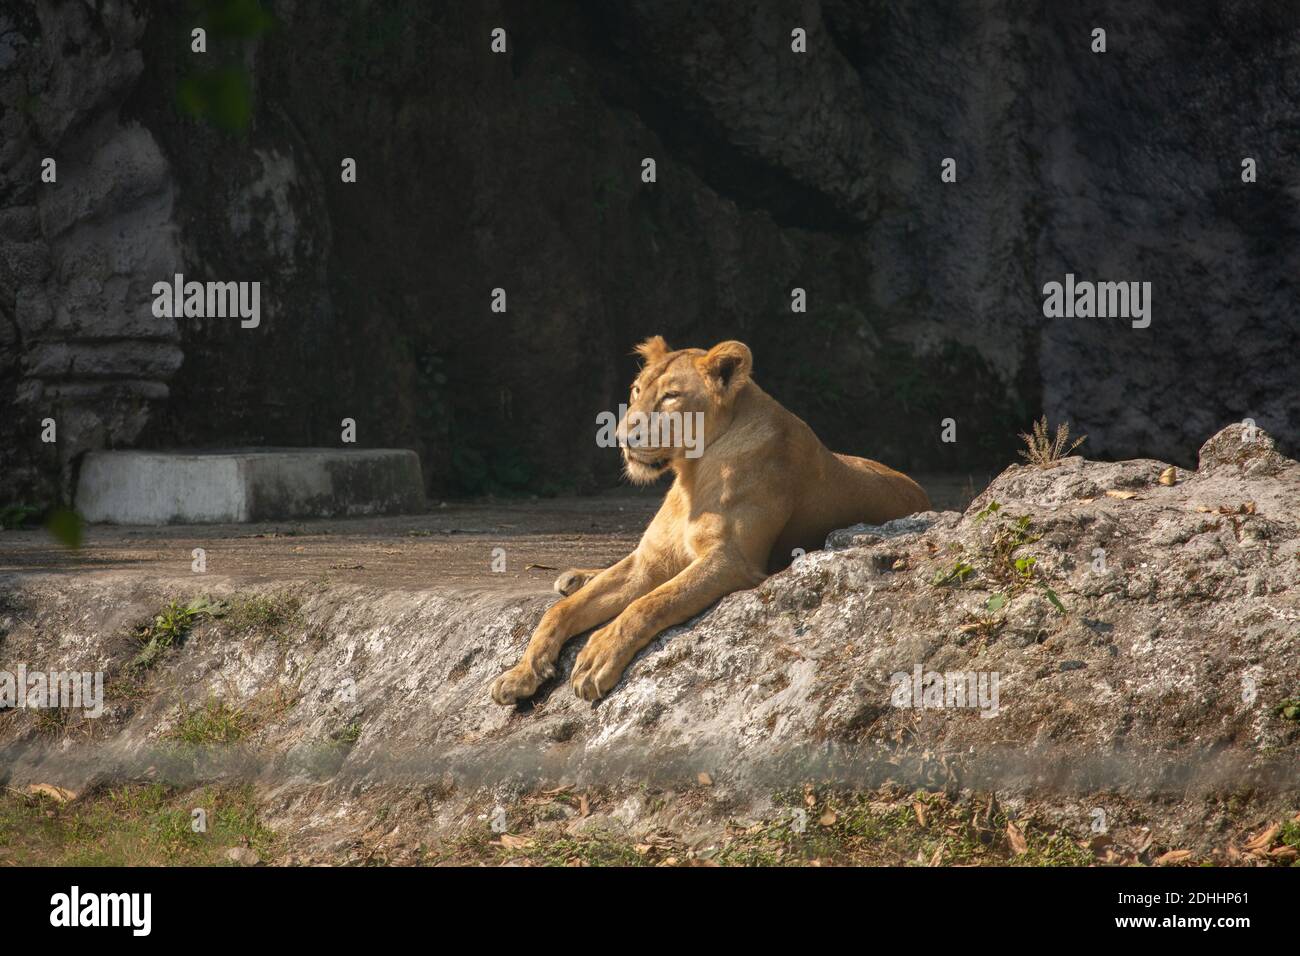 African lioness in an open enclosure at a Indian wildlife sanctuary Stock Photo